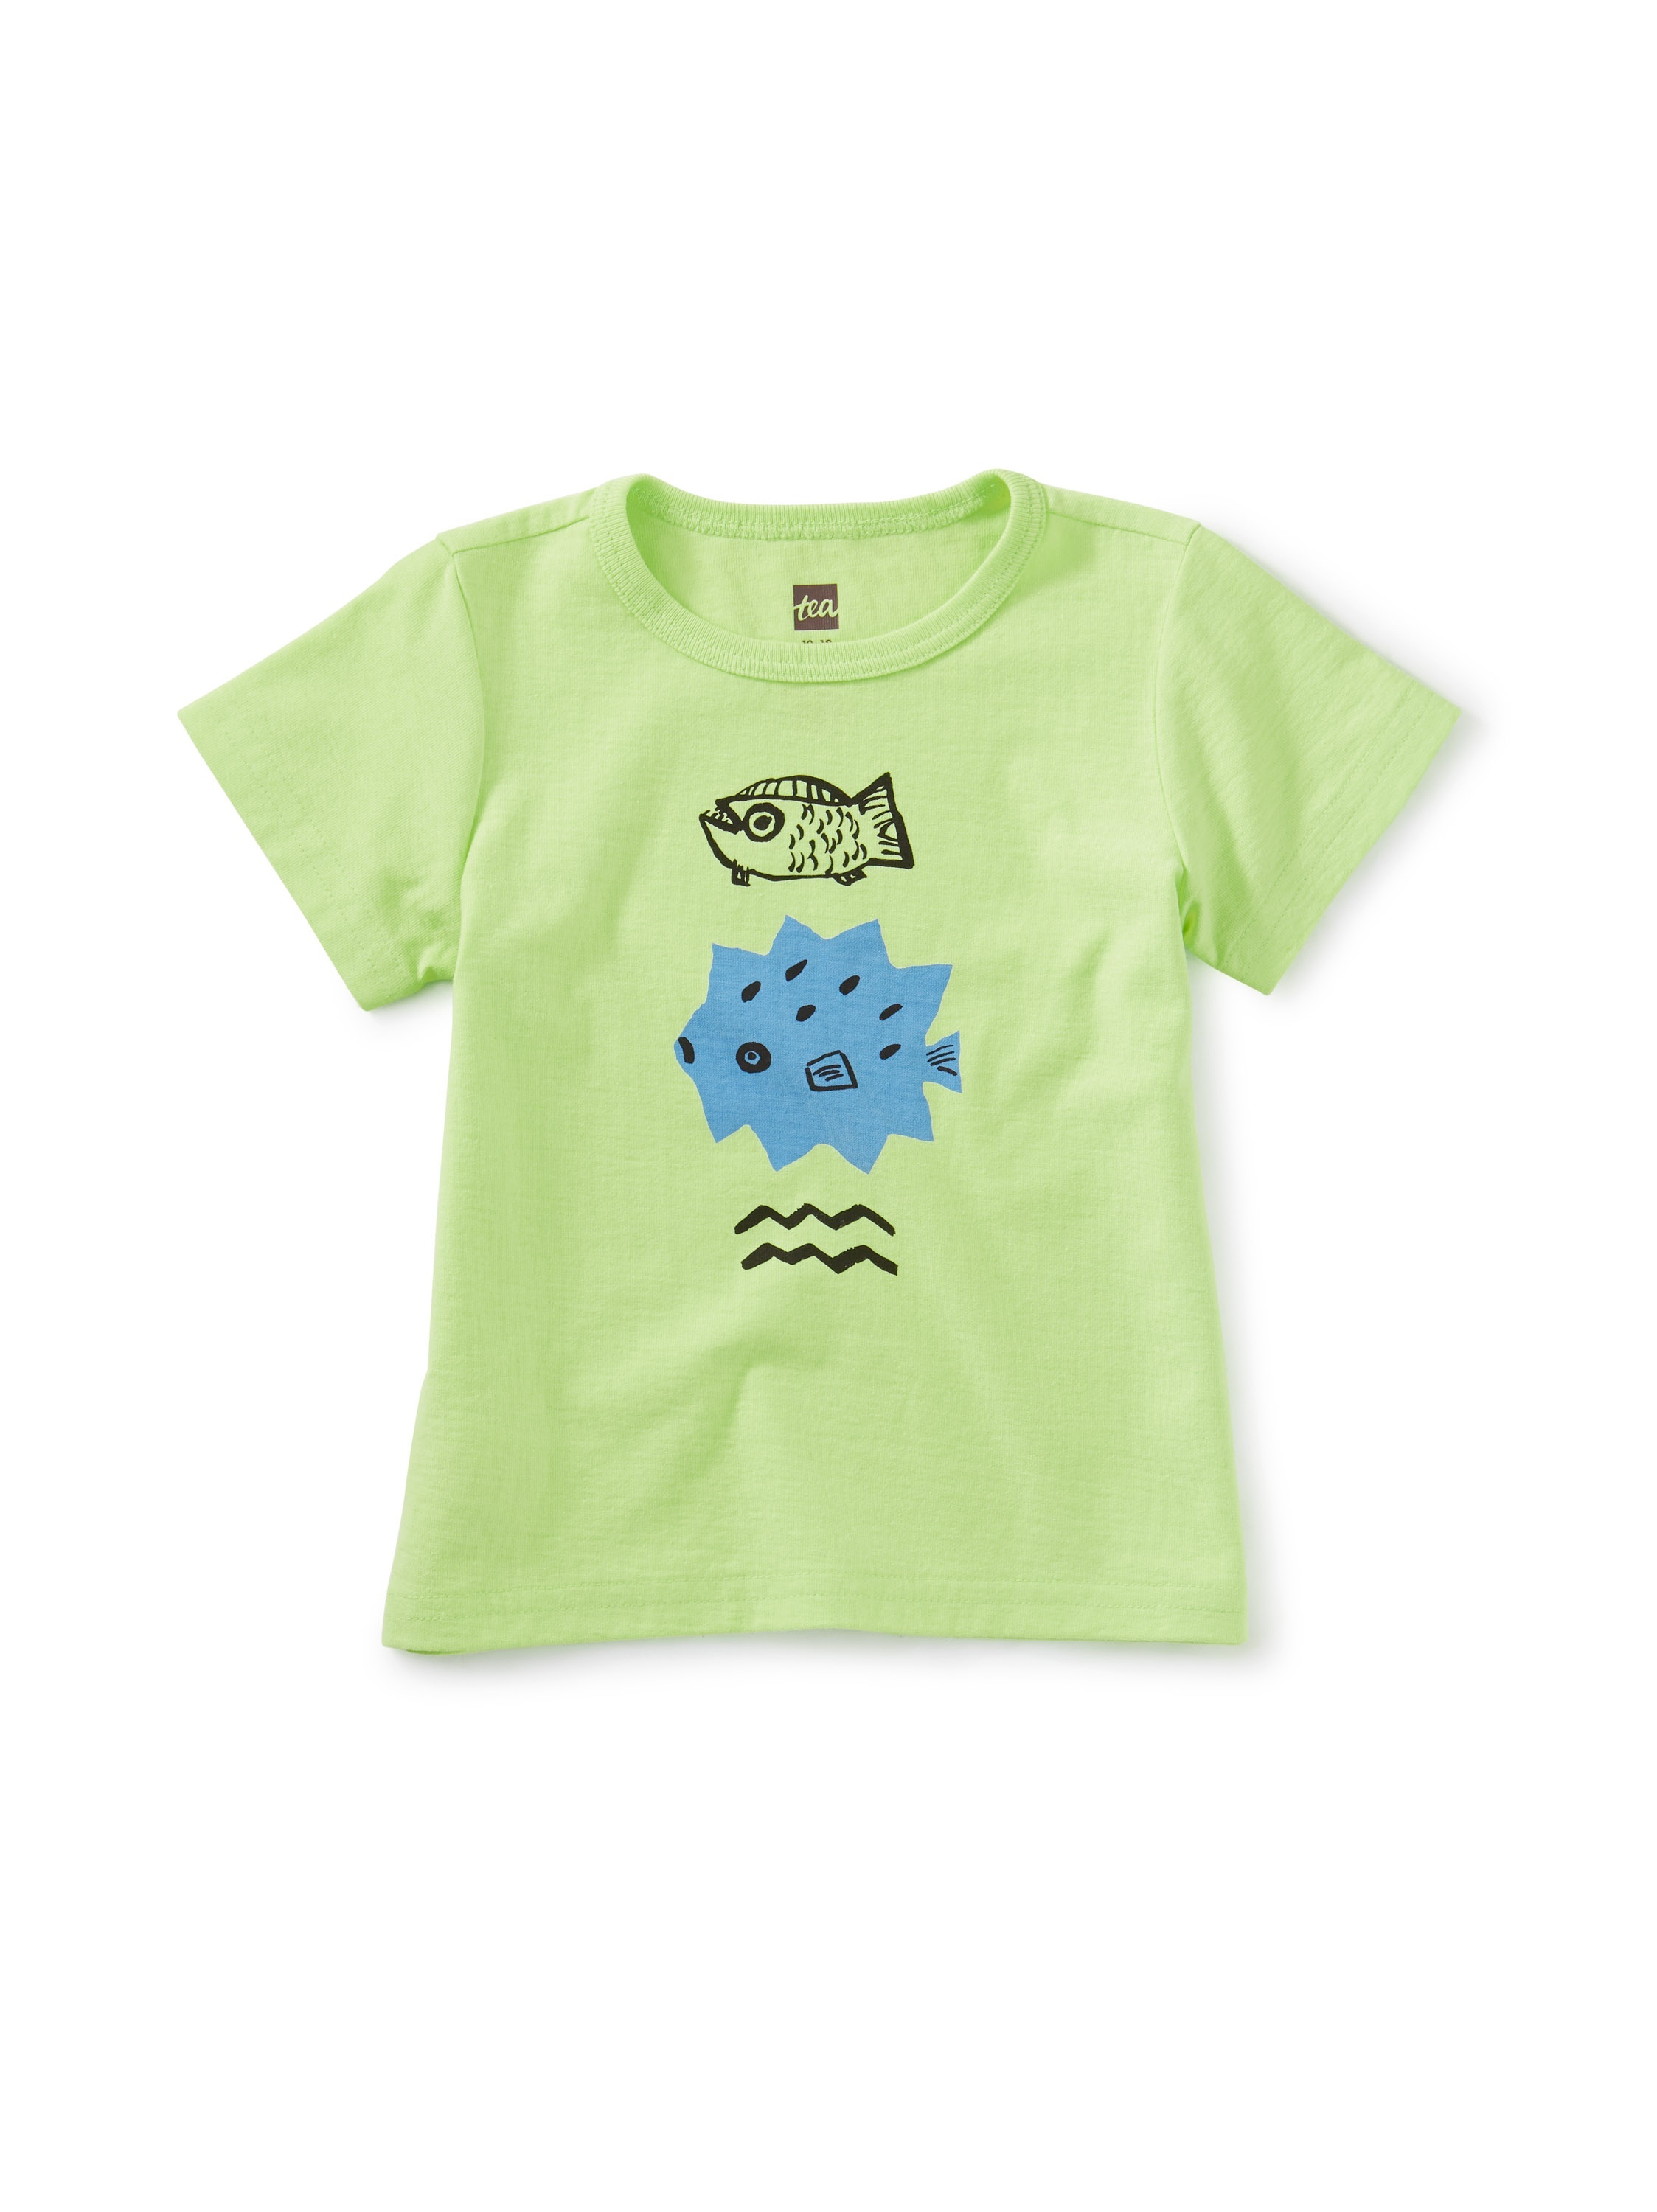 Puffy The Blowfish Baby Tee | Tea Collection